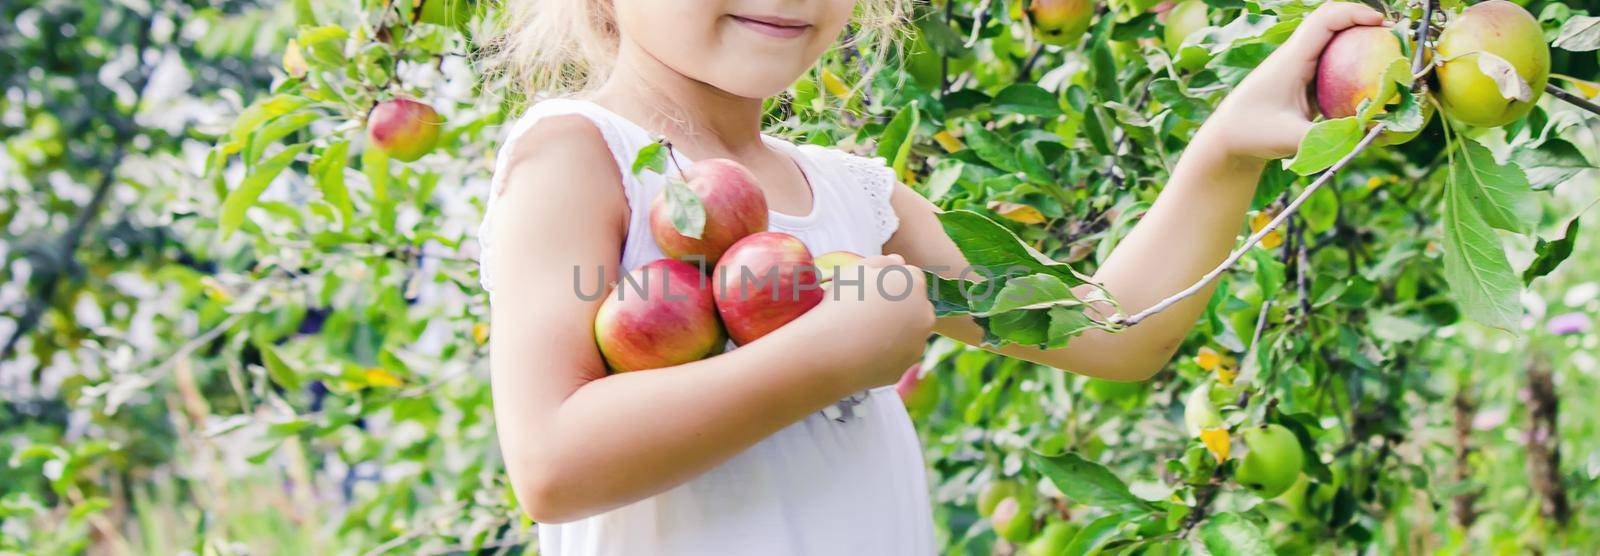 Child with Child with an apple. Selective focus. Garden Food